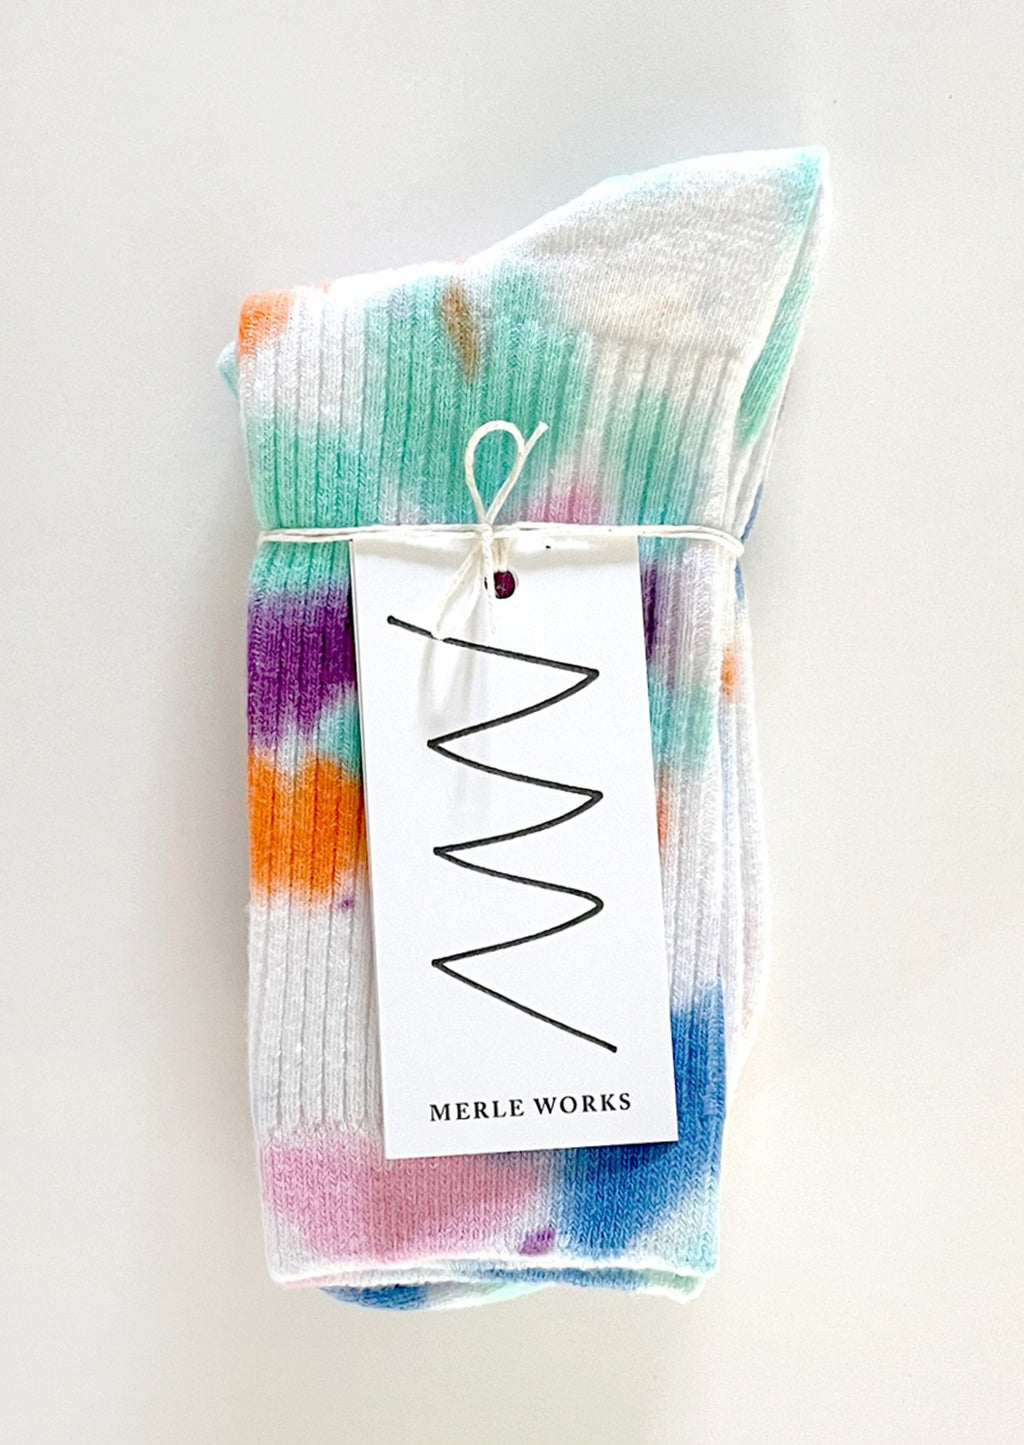 Memphis: A pair of tie dye socks in white with bright aqua, blue, orange, pink and purple.